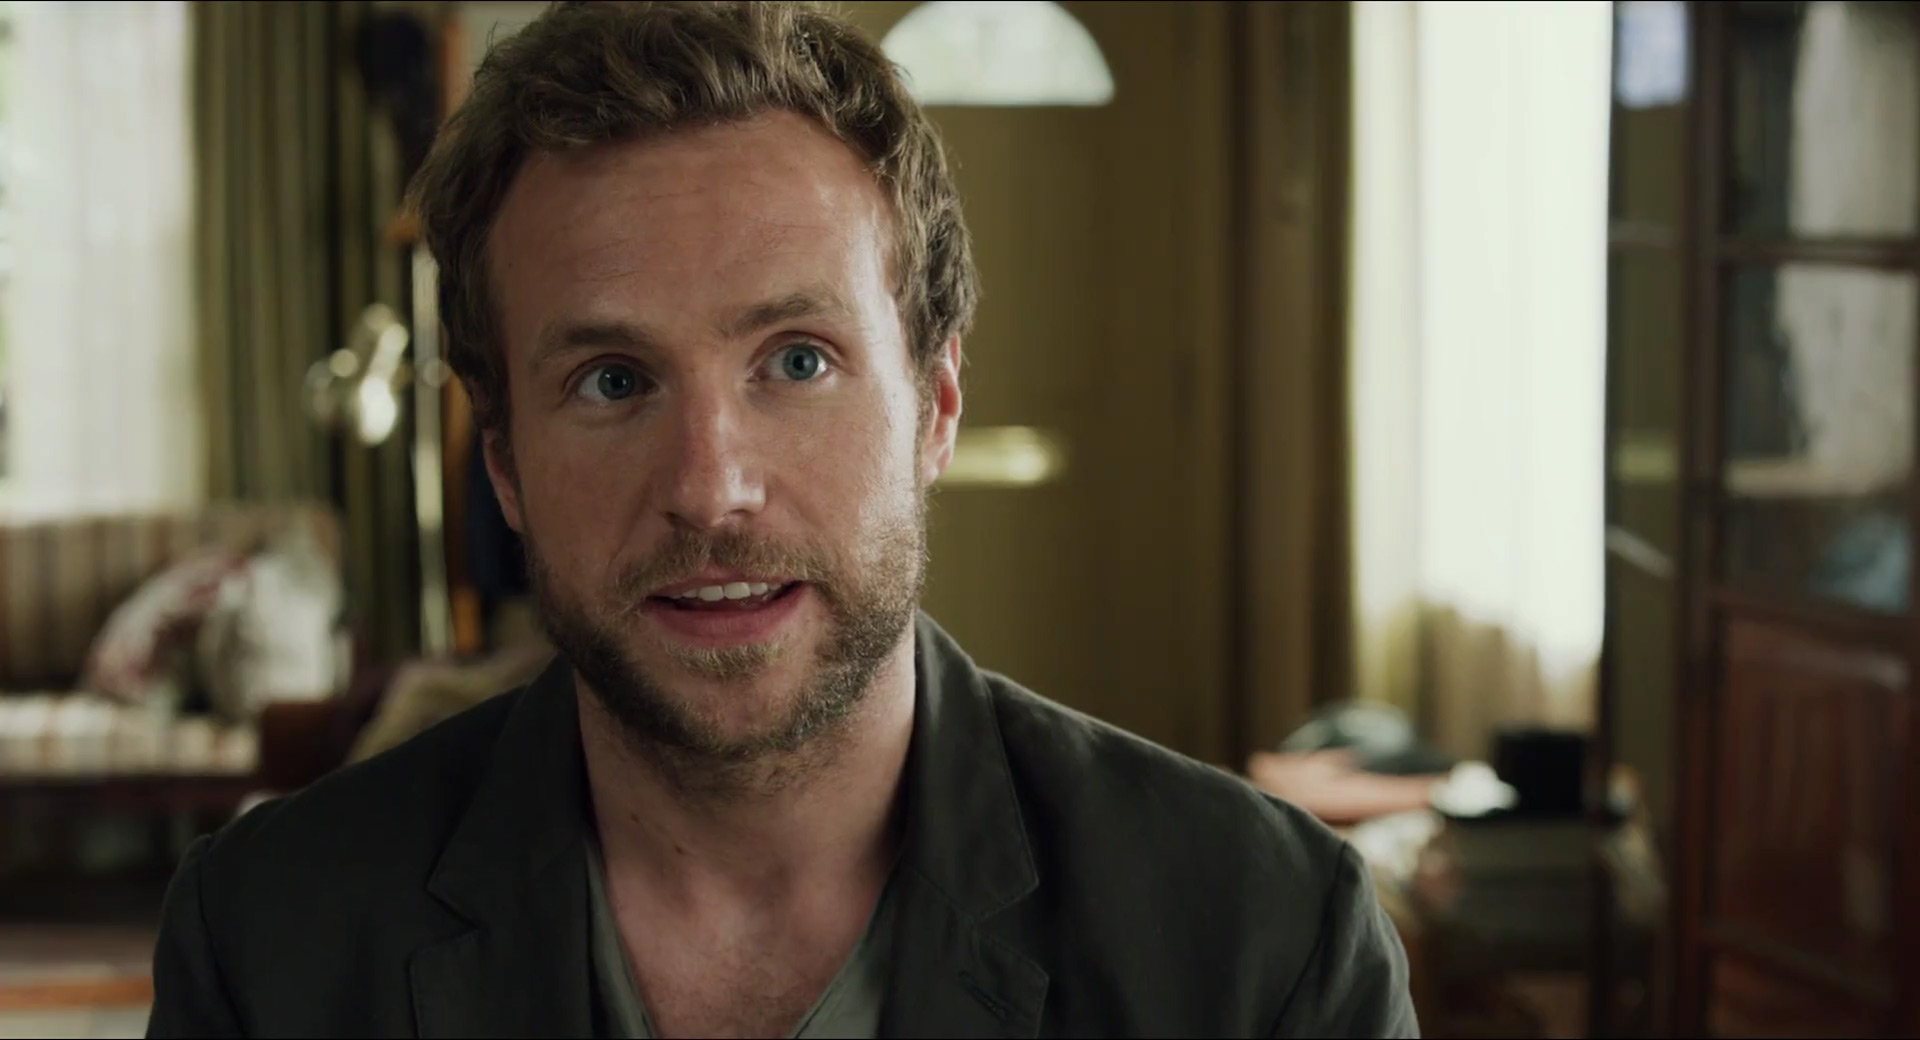 Rafe Spall in Life of Pi